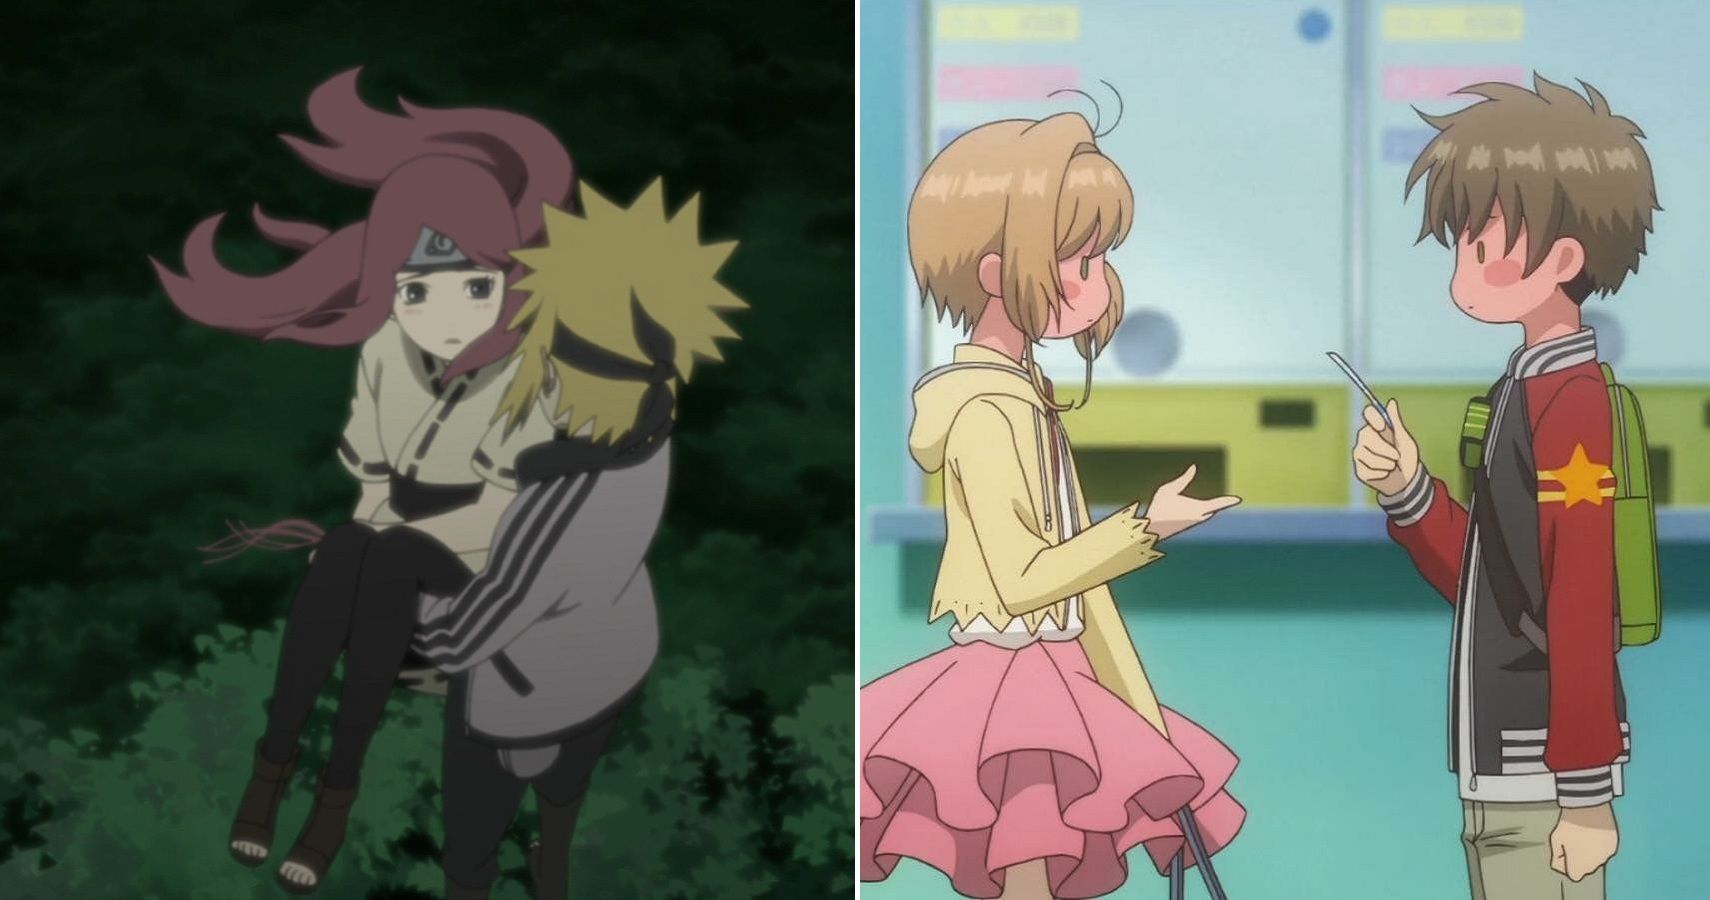 15 Best Childhood Friend Romances In Anime, Ranked